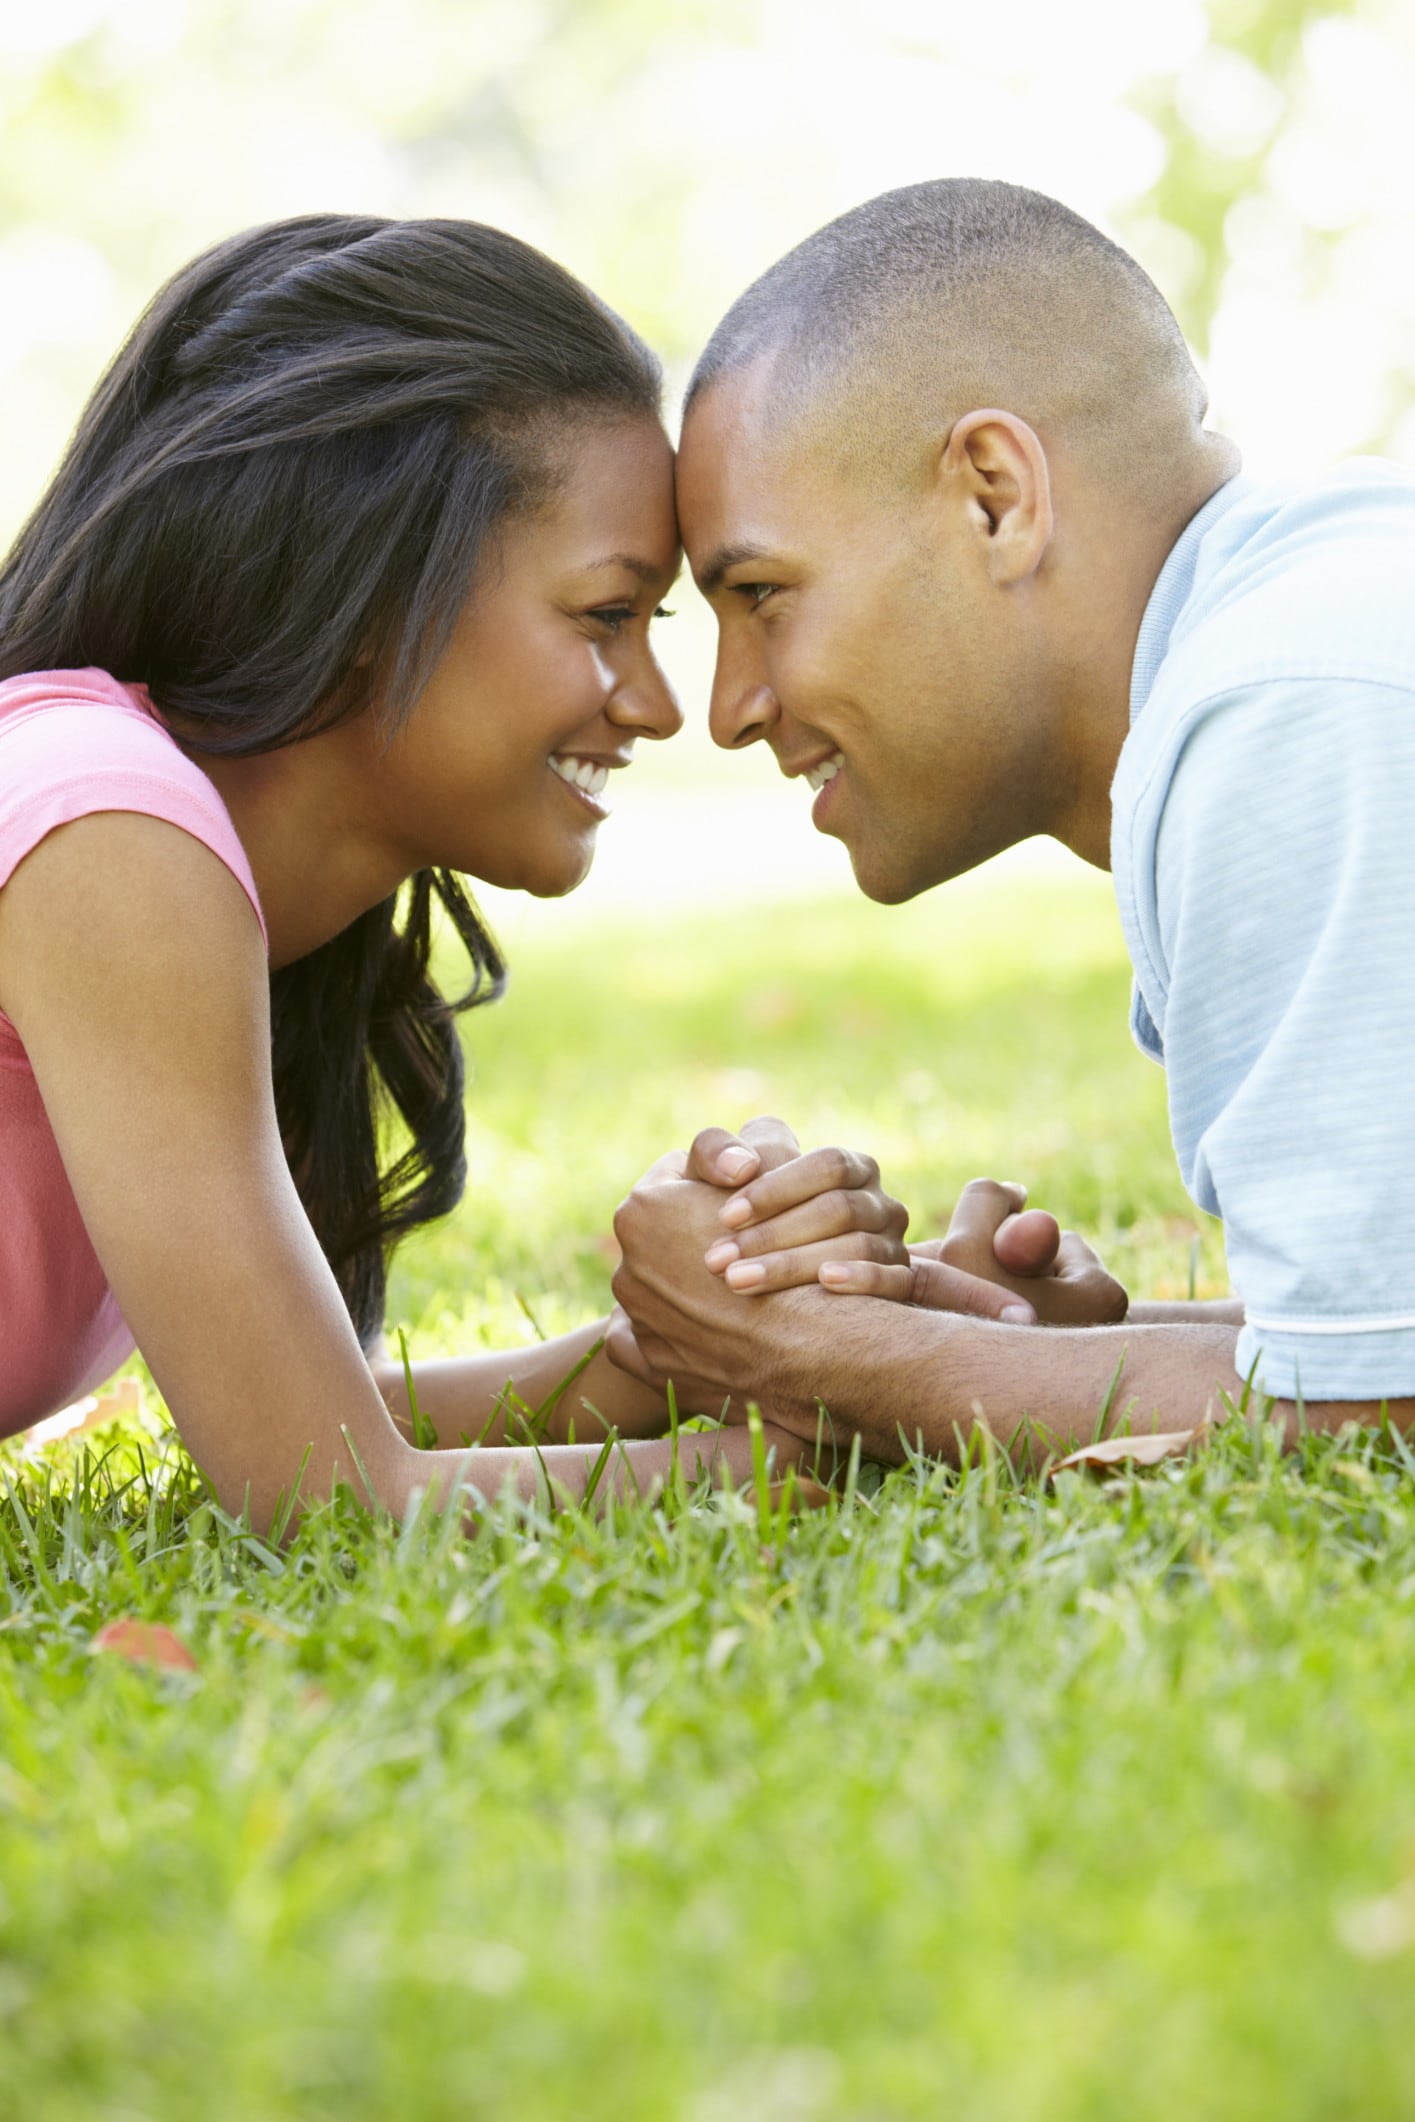 Health News: Why Mr. Wrong May Look Like Mr. Right